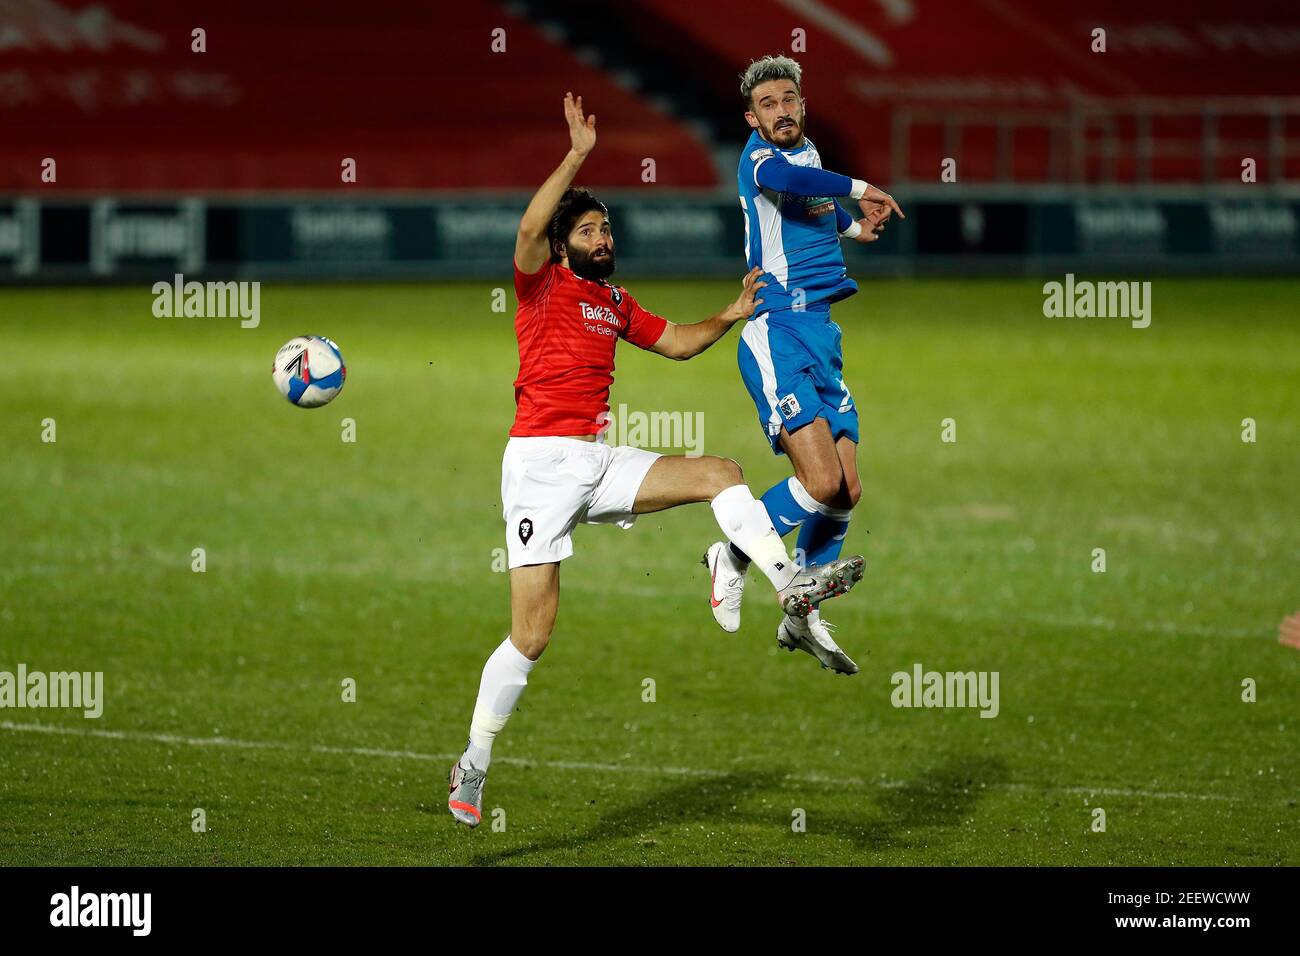 SALFORD, ENGLAND. FEB 16TH Barrows Brad Barry clashes with Salfords Richie Towell during the Sky Bet League 2 match between Salford City and Barrow at Moor Lane, Salford on Tuesday 16th February 2021. (Credit: Chris Donnelly | MI News) Credit: MI News & Sport /Alamy Live News Stock Photo